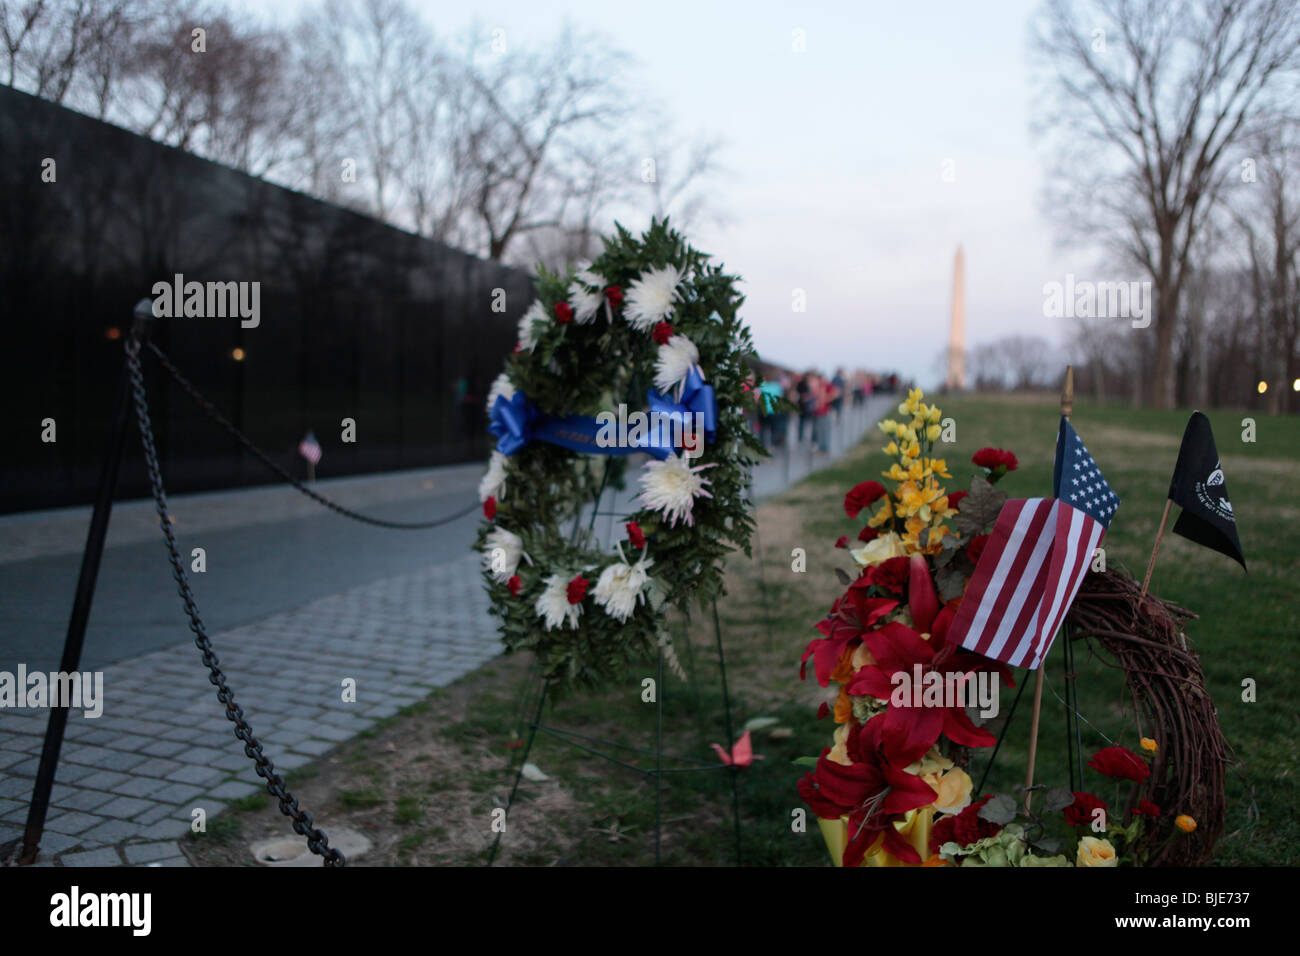 The Vietnam War memorial with washington memorial in background. wreaths american flag POWMIA flag flowers Stock Photo